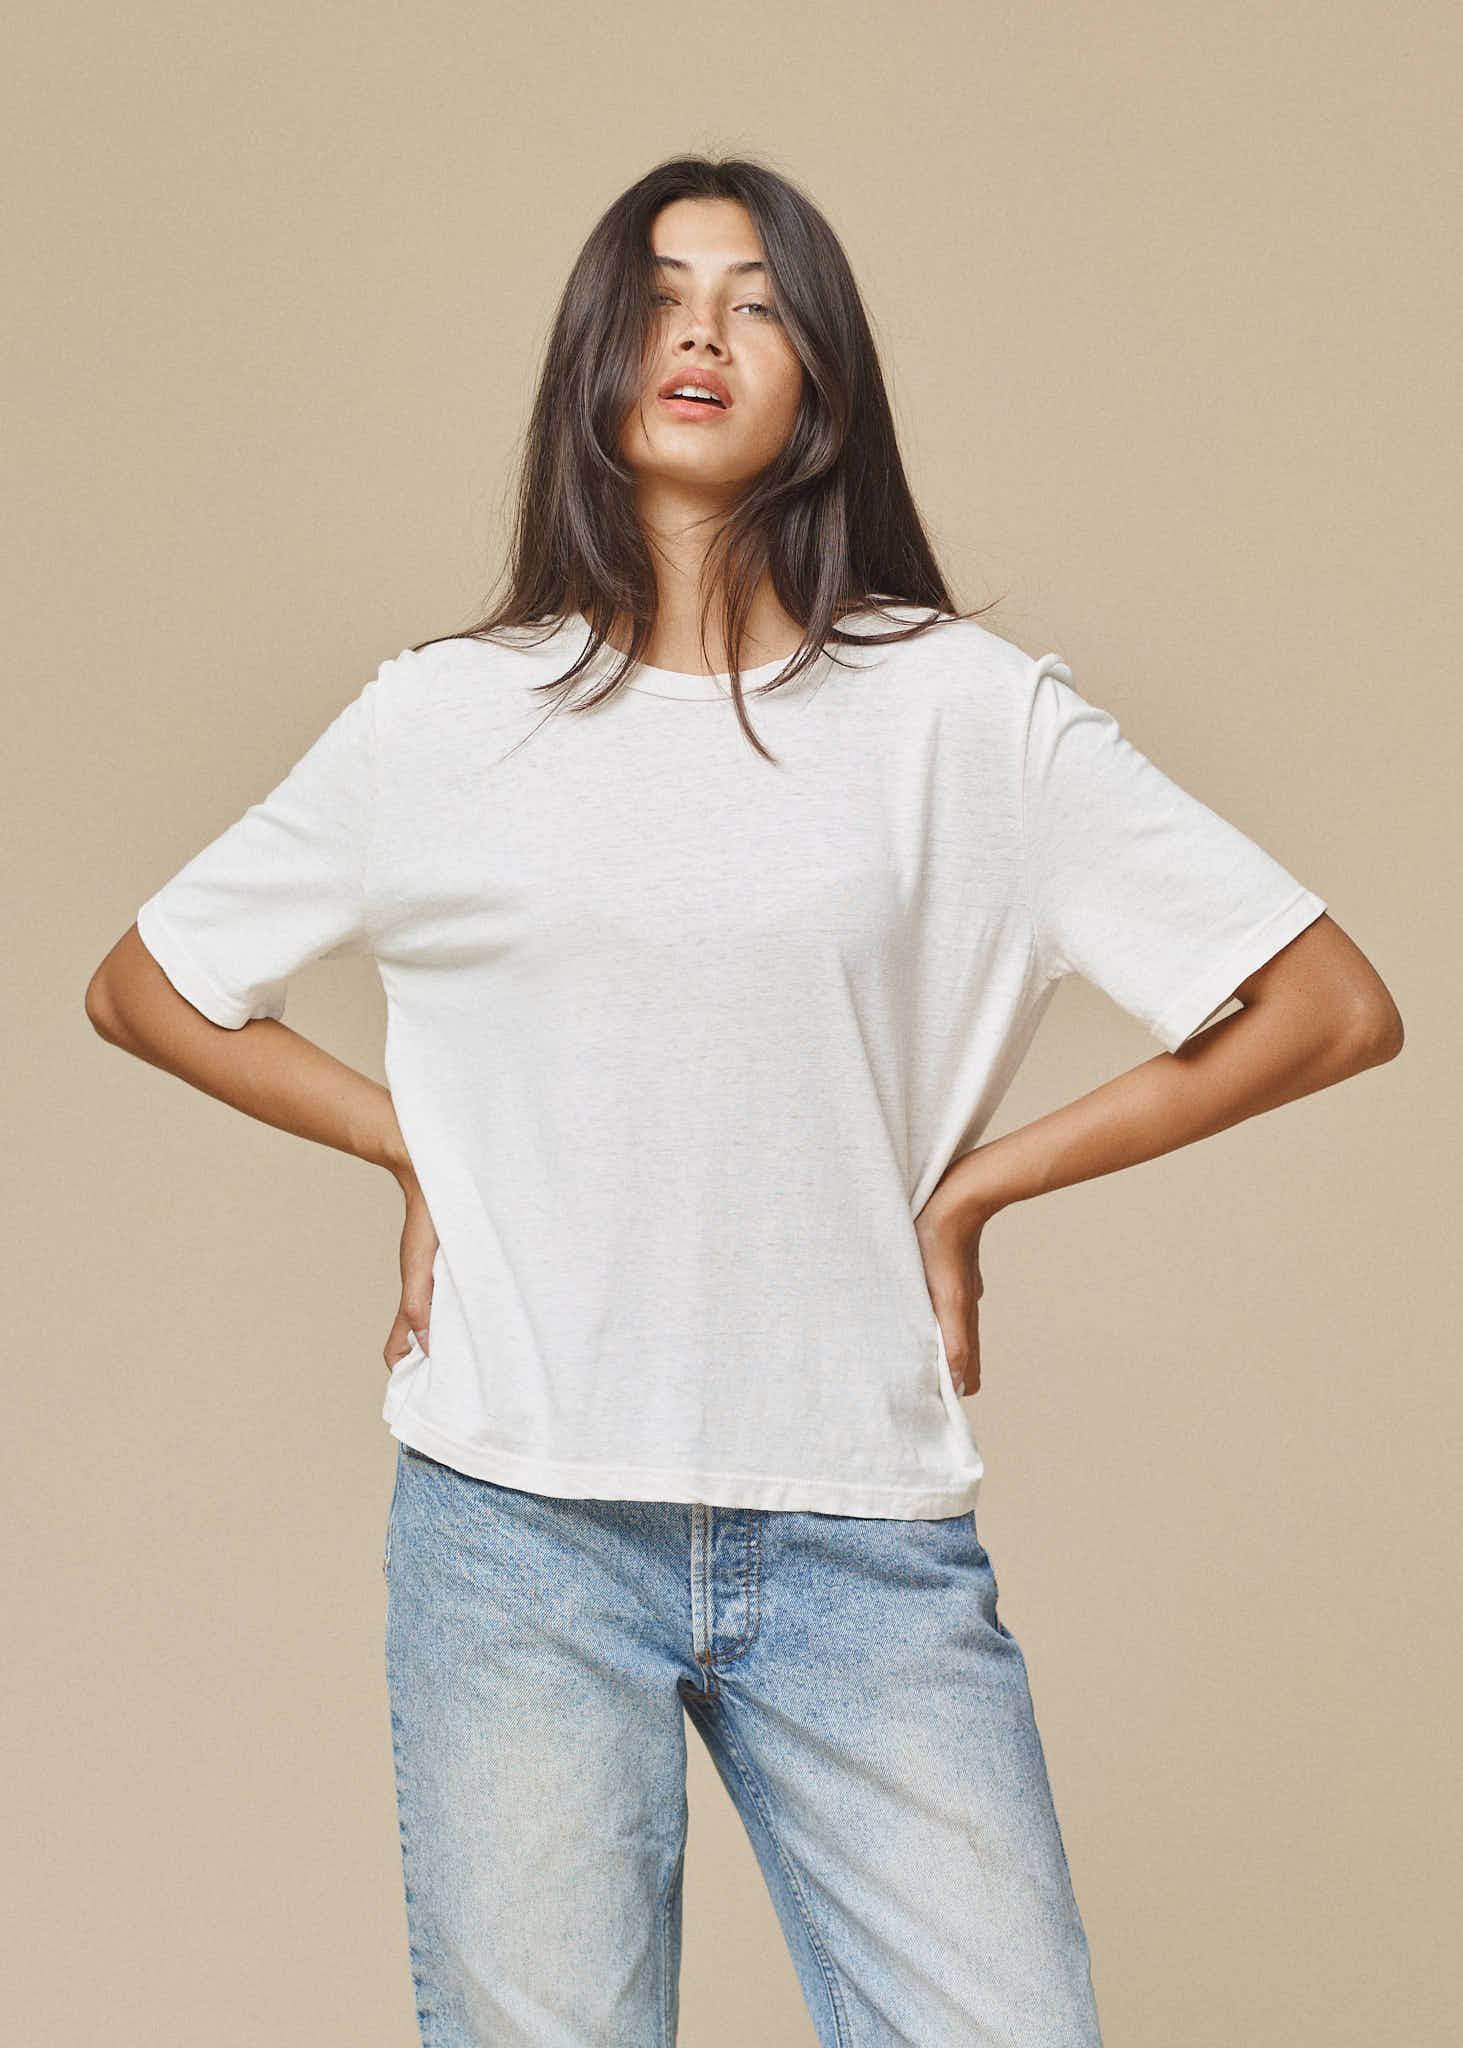 Silverlake Cropped Tee | Jungmaven Hemp Clothing & Accessories / Color: